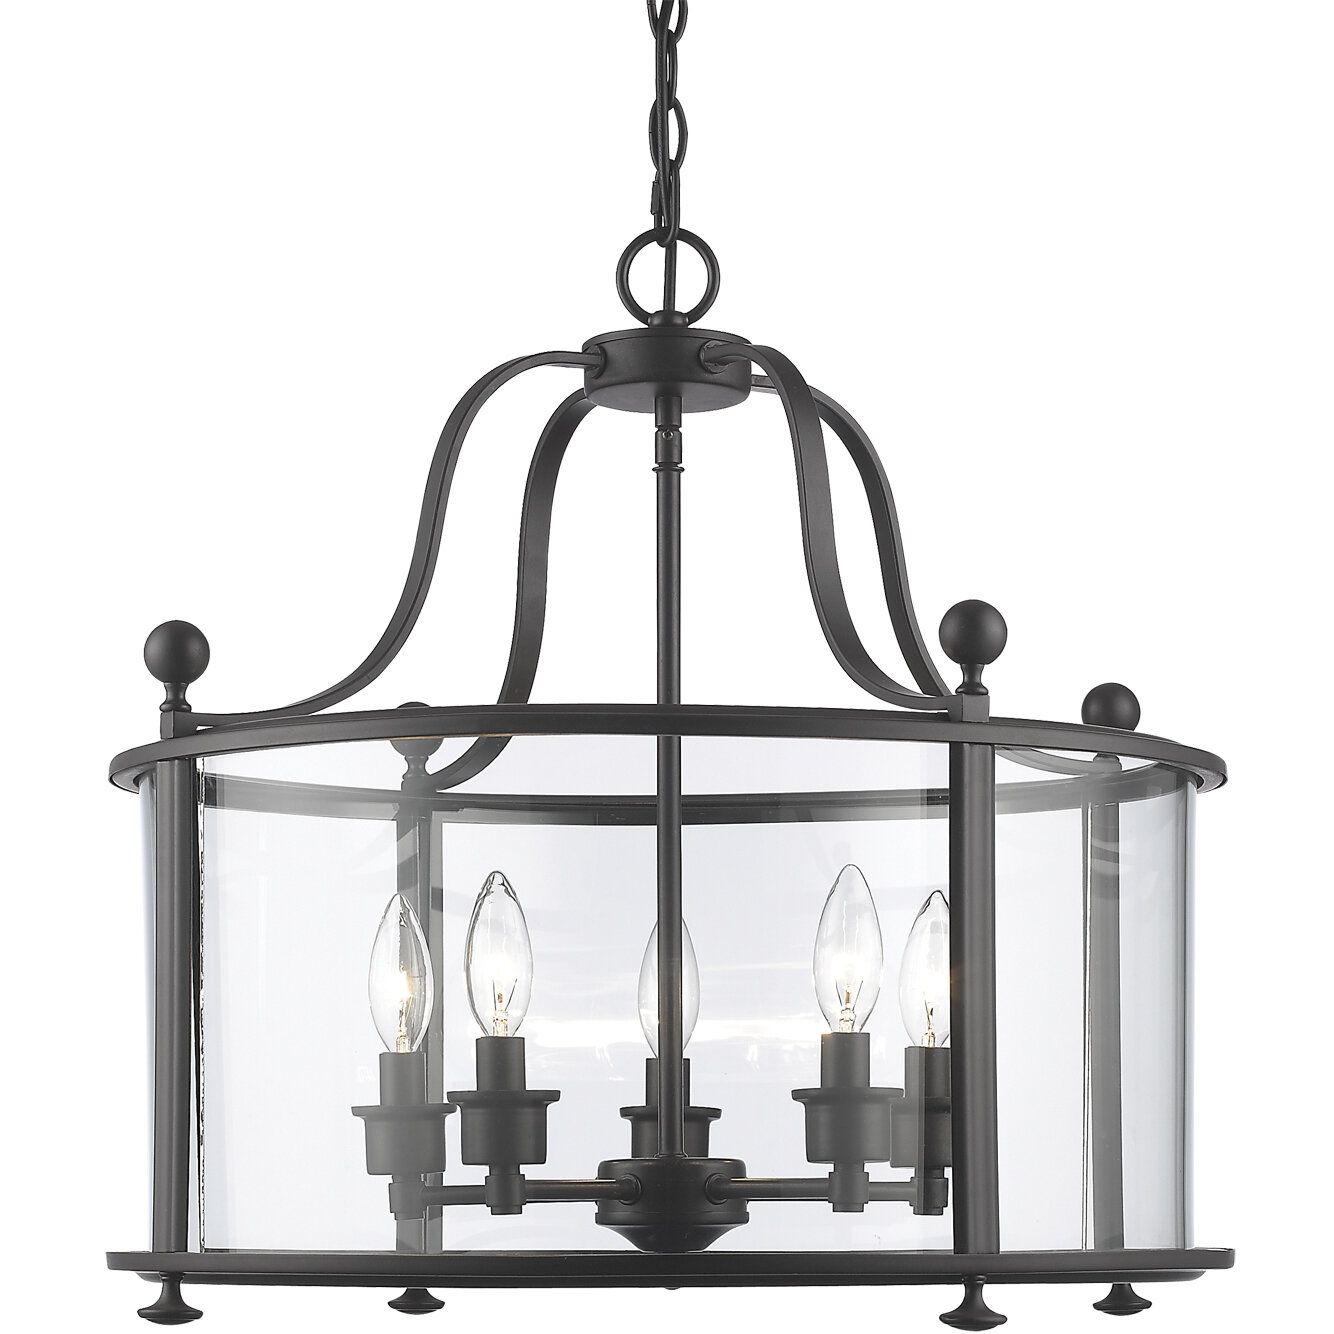 Darby Home Co Kristofer Dimmable Lantern Drum Chandelier & Reviews | Wayfair With Regard To Five Light Lantern Chandeliers (Photo 13 of 15)